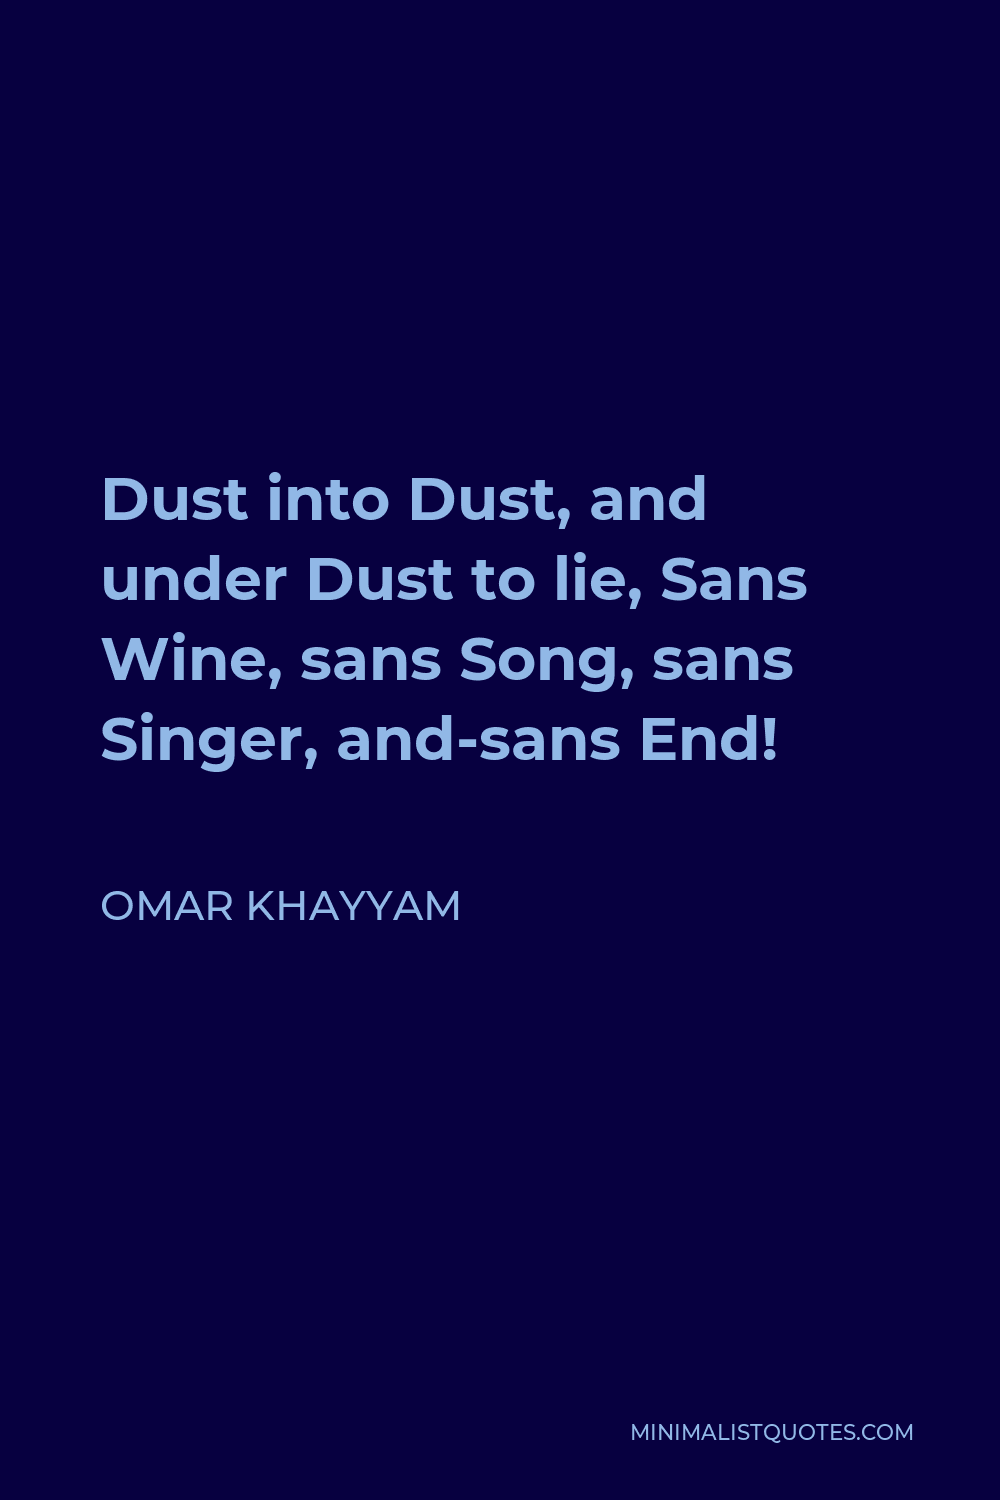 Omar Khayyam Quote - Dust into Dust, and under Dust to lie, Sans Wine, sans Song, sans Singer, and-sans End!